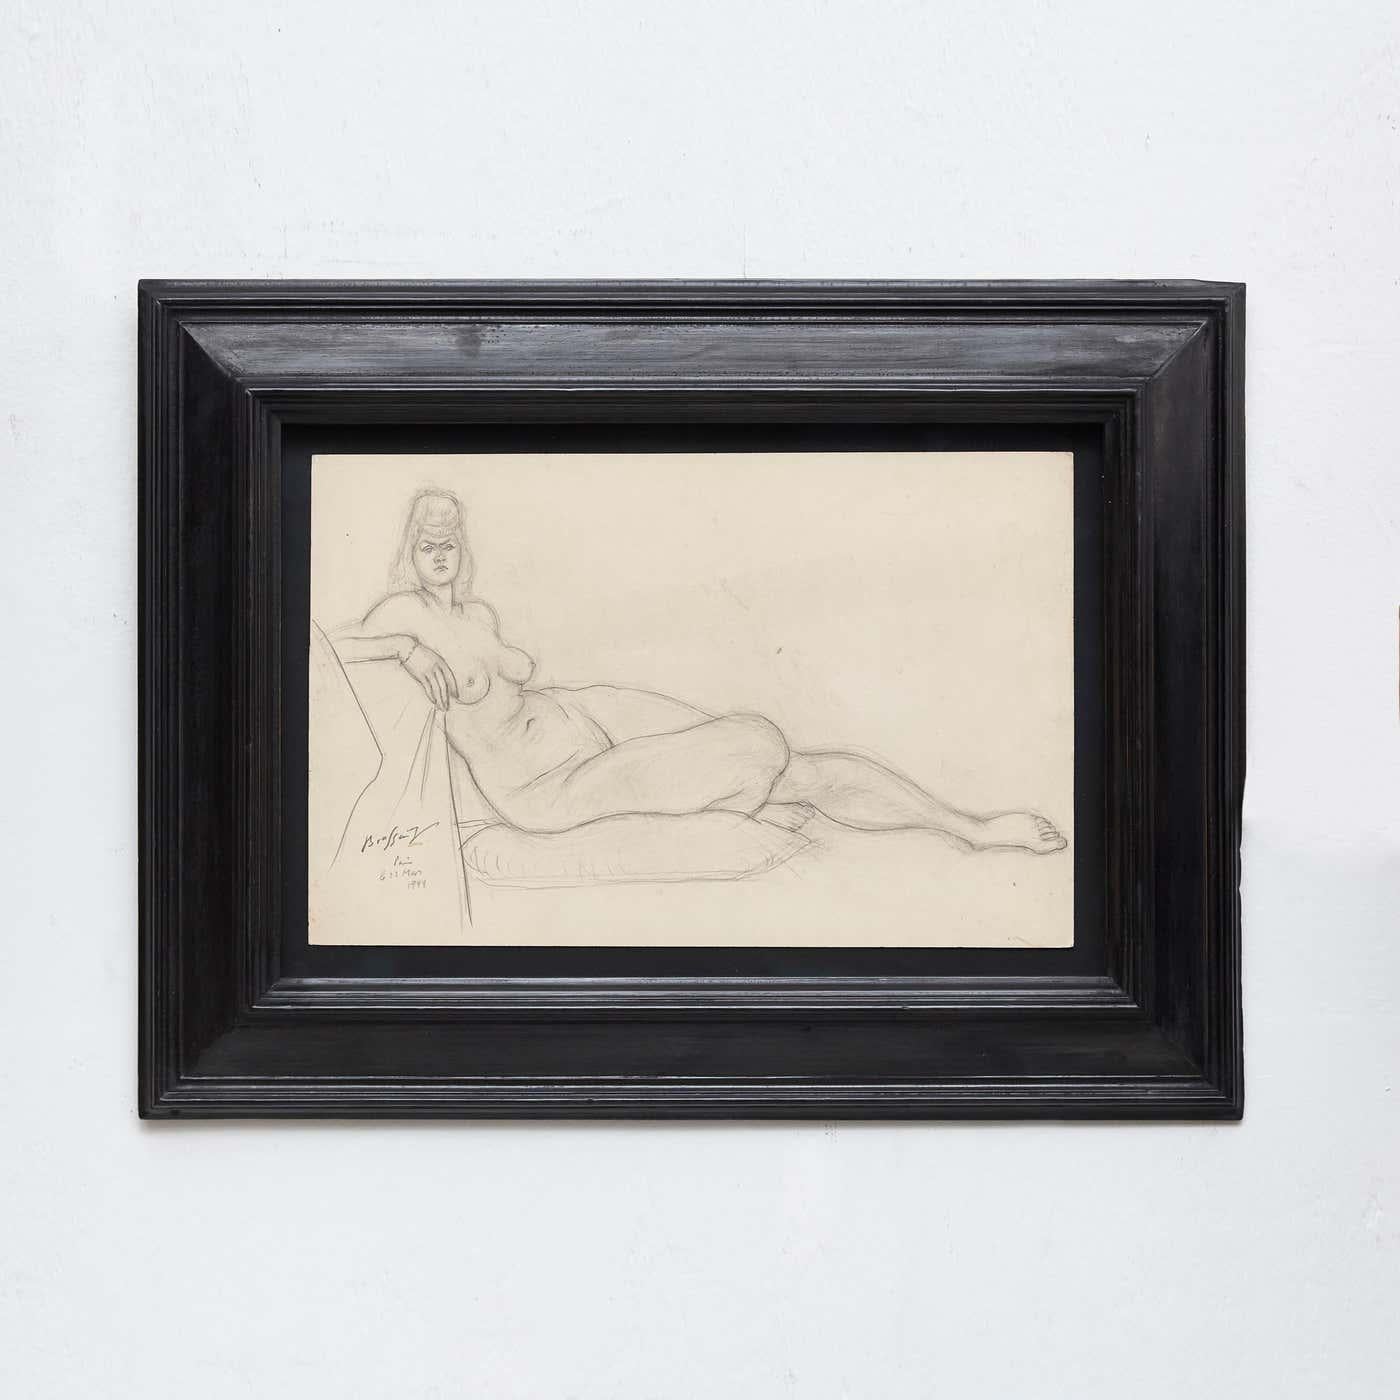 Immerse yourself in the timeless allure of Brassaï's masterful artistry with this exceptionally rare nude pencil drawing, delicately crafted in 1944 Paris. A captivating portrayal of feminine grace, this signed drawing by Gyula Halász himself